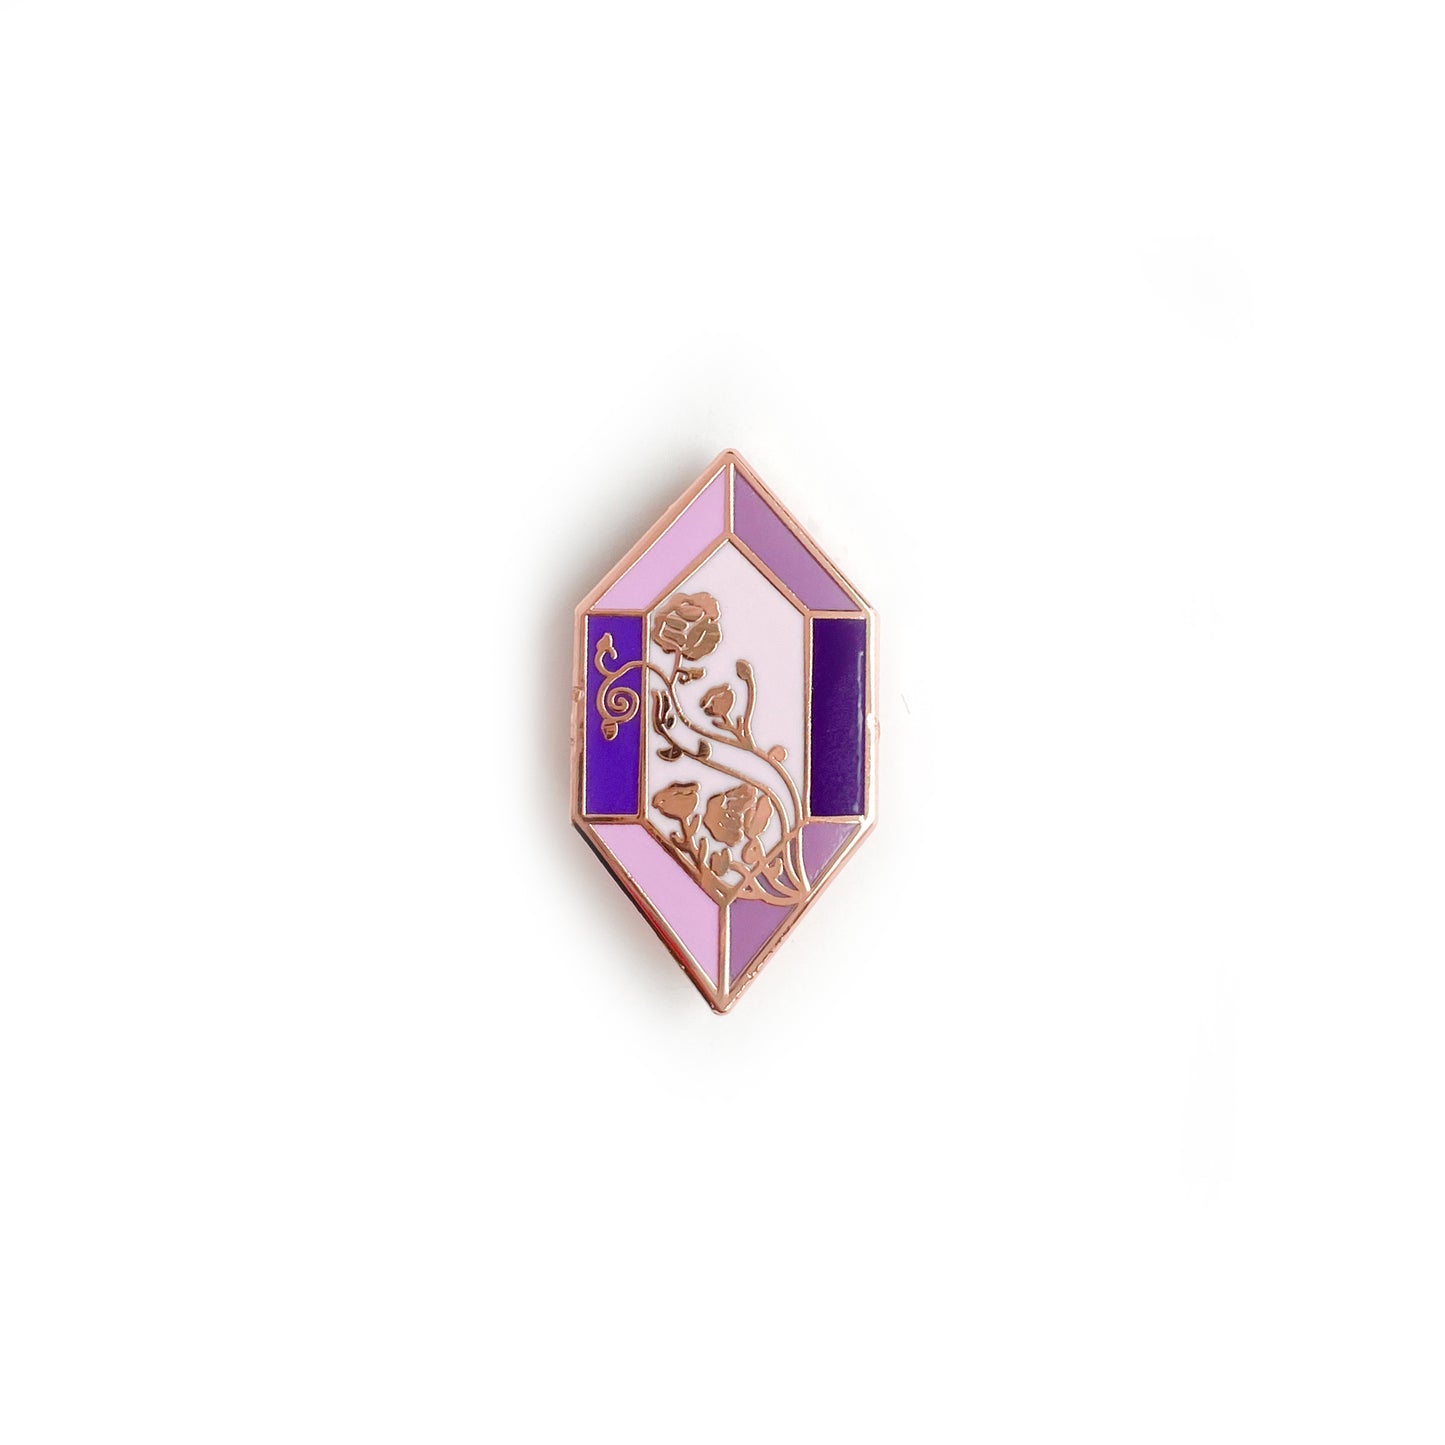 An elongated hexagon shaped enamel pin. It has rose gold colored metal and various shades of purple in the geometric panels to look like a gem. A floral line pattern crosses diagonally across the face of the gem.